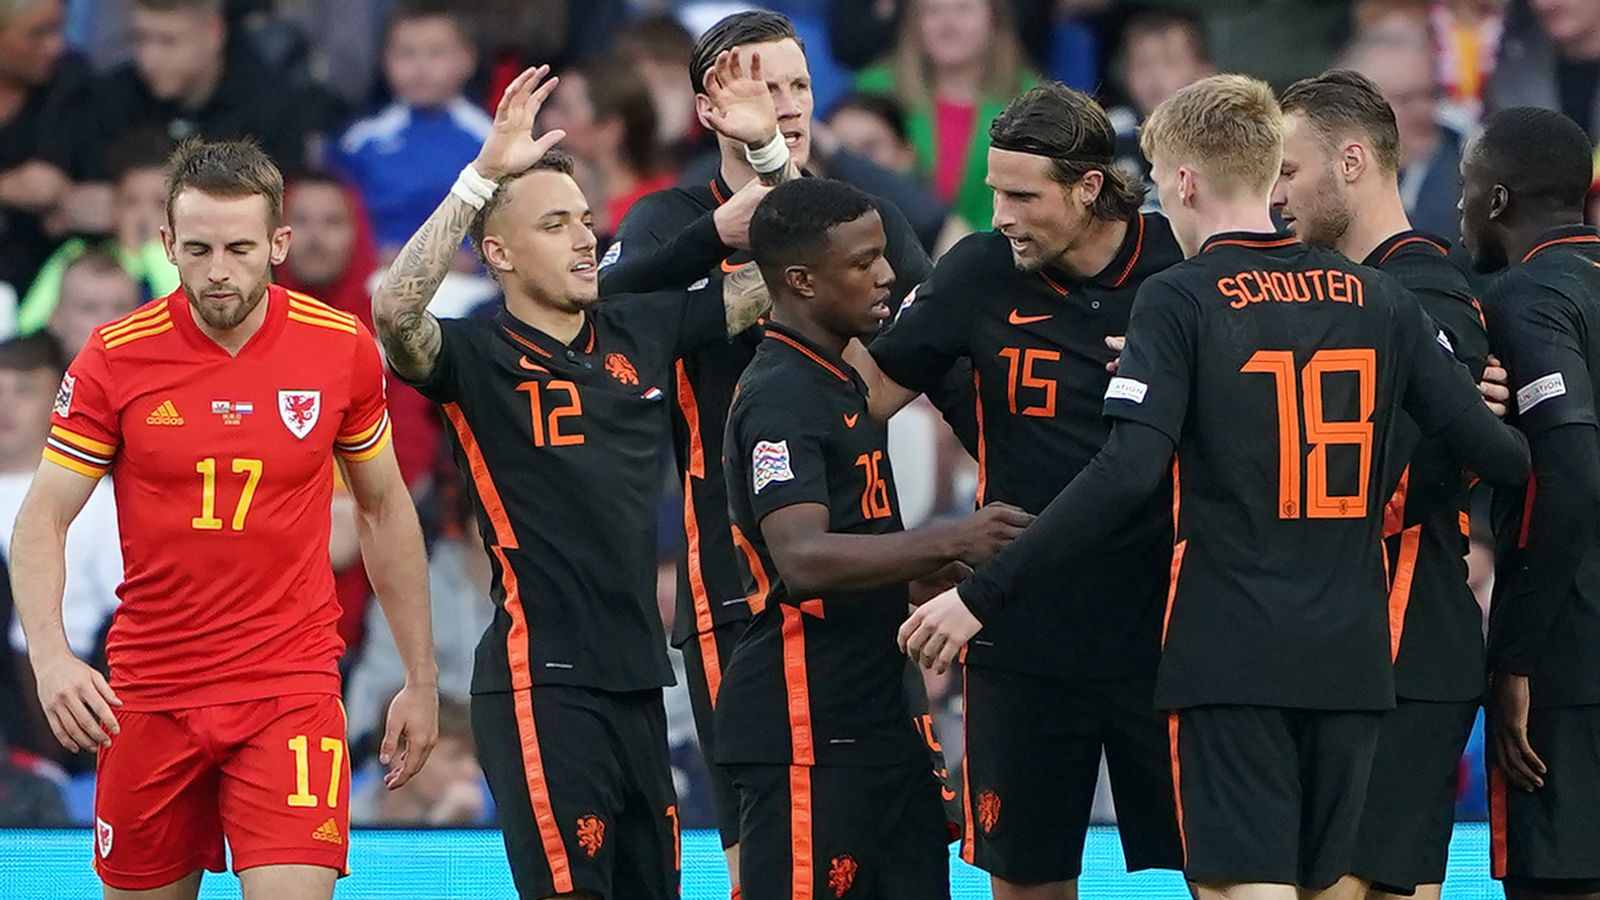 Football Scores: Wales 1-2 Netherlands